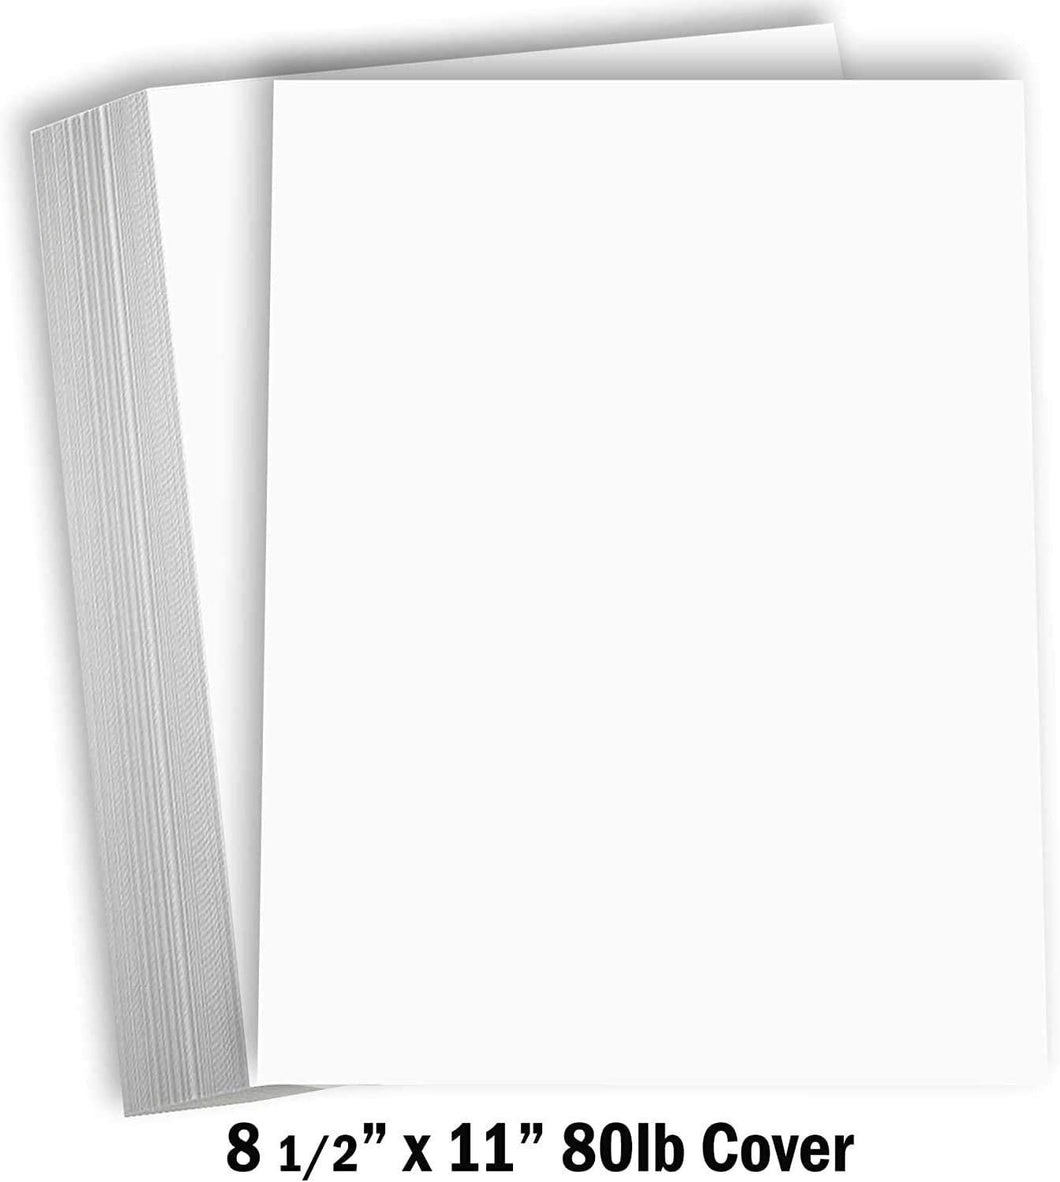 Hamilco White Cardstock Thick 11x17 Paper - Heavy Weight 100 lb Cover Card Stock 50 Pack (100lb Cover)